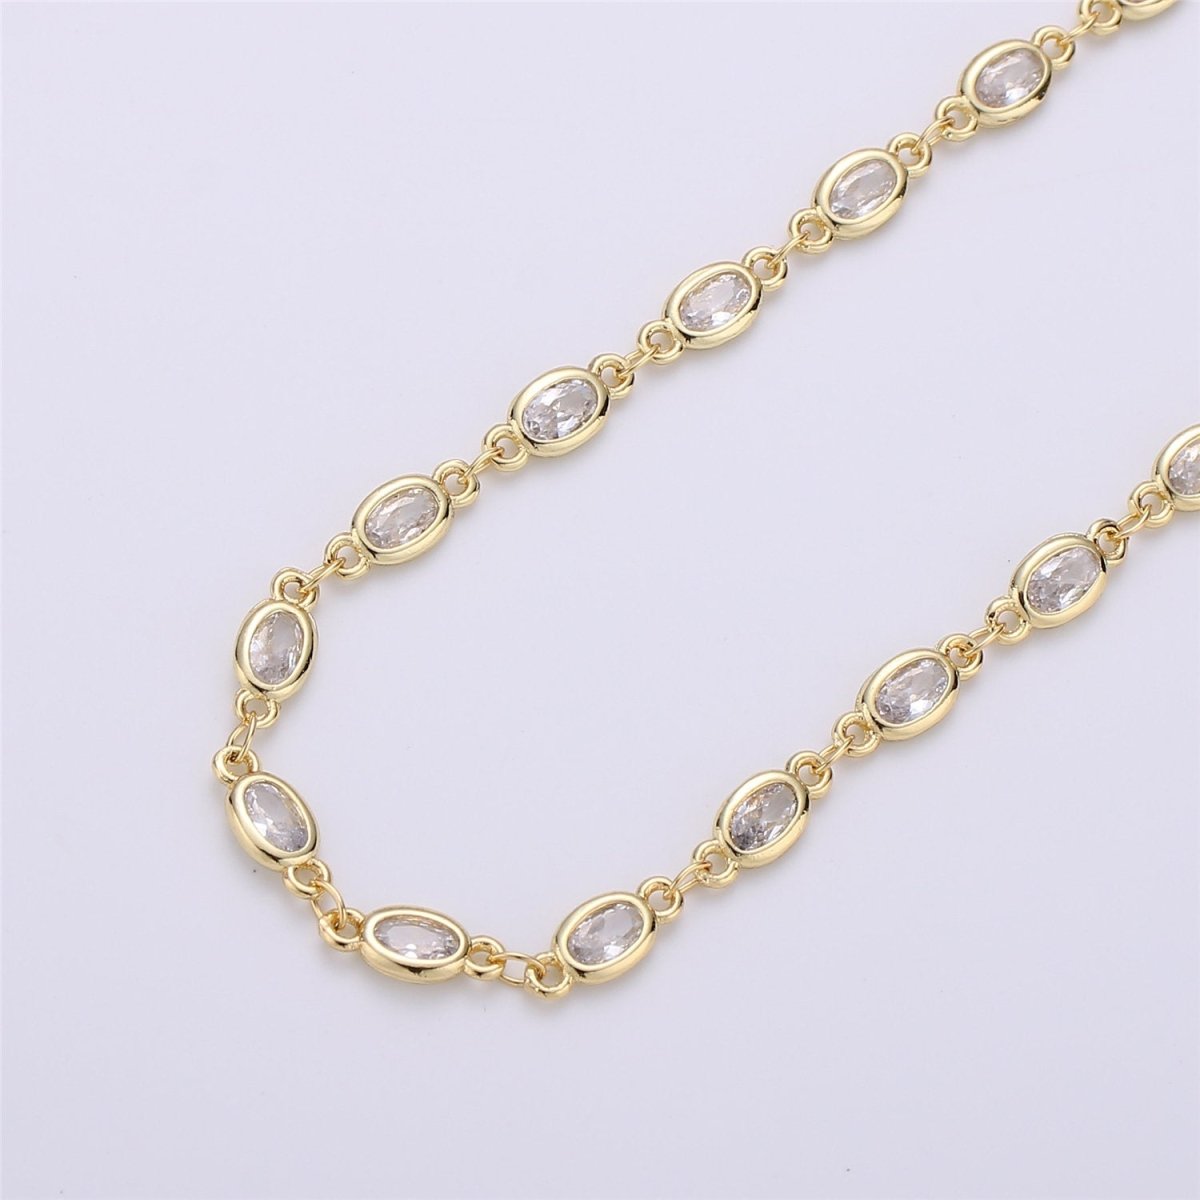 24K Gold Filled Clear Cubic Zirconia Chains, Oval Bezel Chains Silver 1 Yard 5mm CZ Connectors Link for Rosary Necklace Supply, White Gold Filled DESIGNED Chain | ROLL-104, ROLL-105 Clearance Pricing - DLUXCA